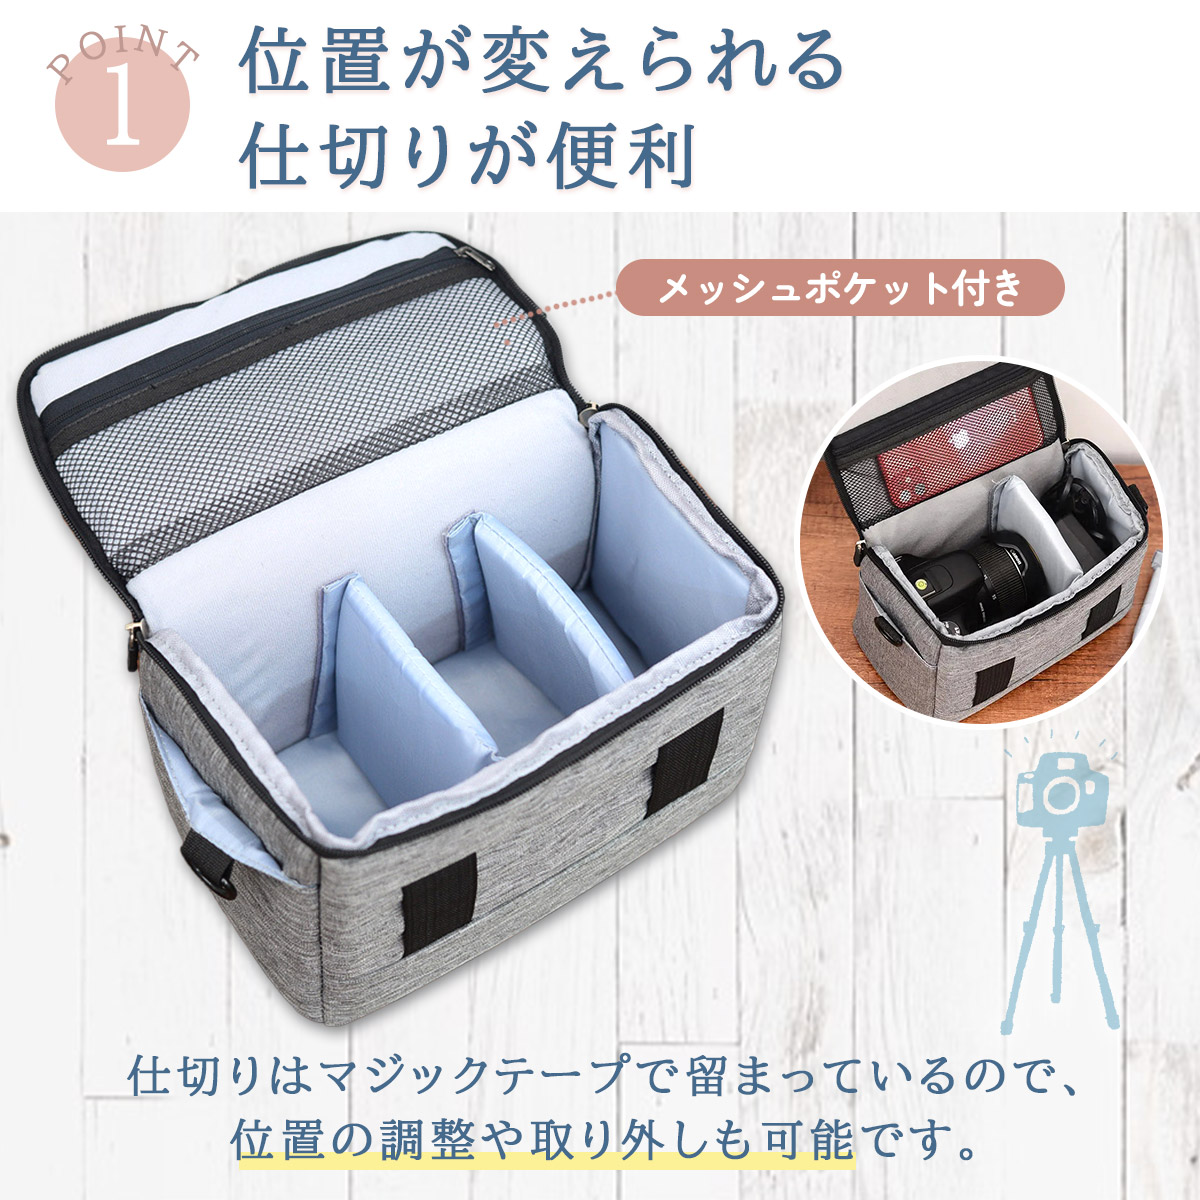  camera bag shoulder single‐lens reflex woman stylish camera case high capacity inner light weight simple beginner diagonal .. water repelling processing man and woman use 